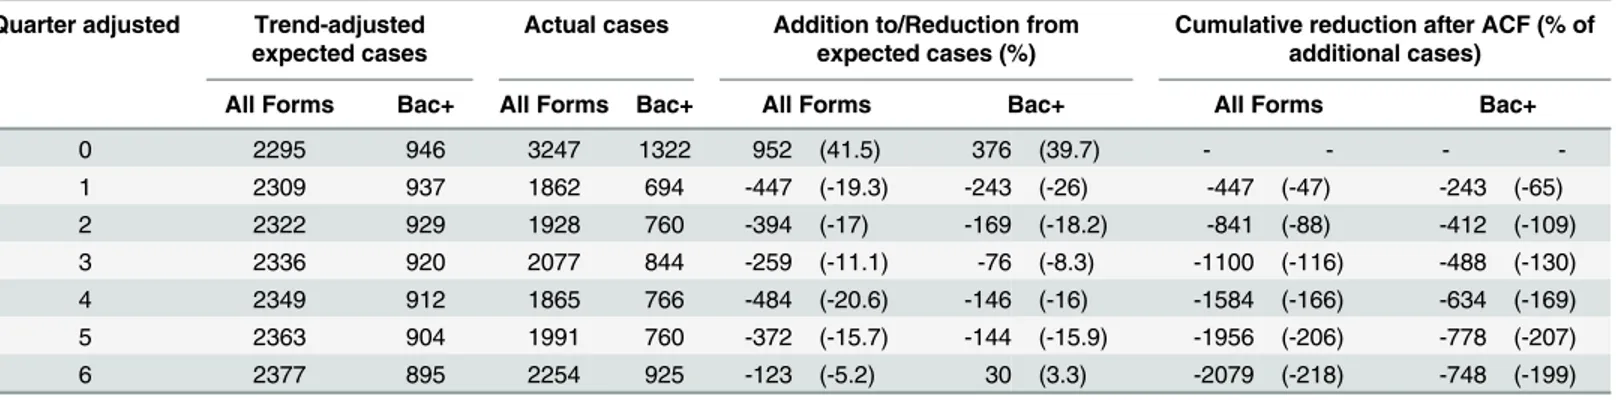 Table 3. Summary of case notification by adjusted-quarter during and after intervention quarter for Year 1.